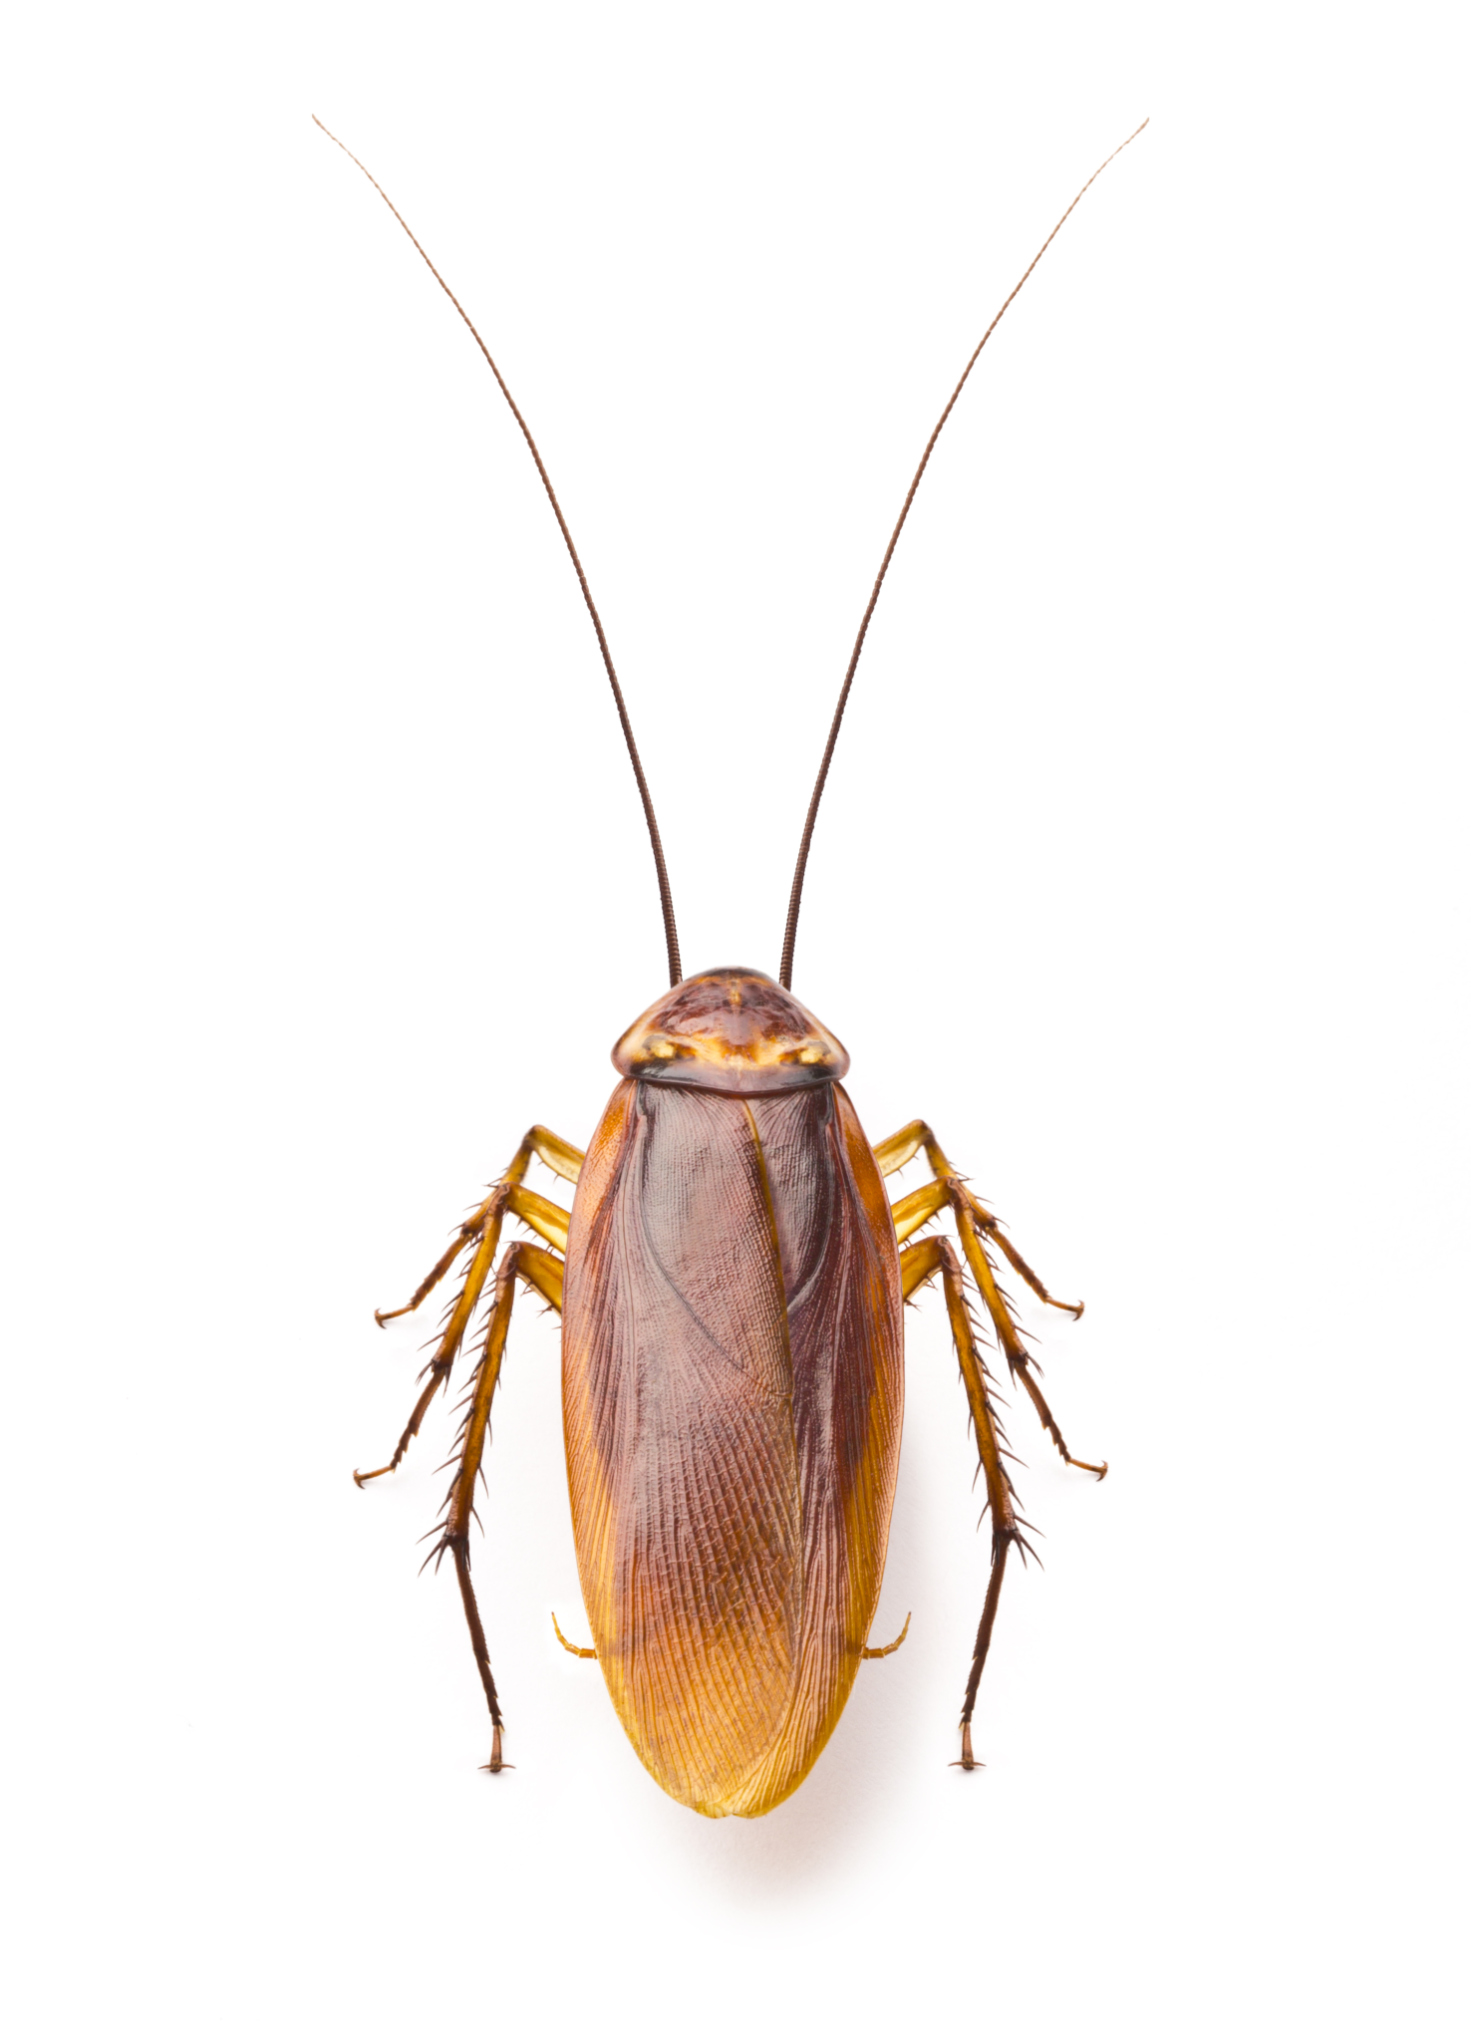 Cockroaches | Tri-County Health Department - Official Website